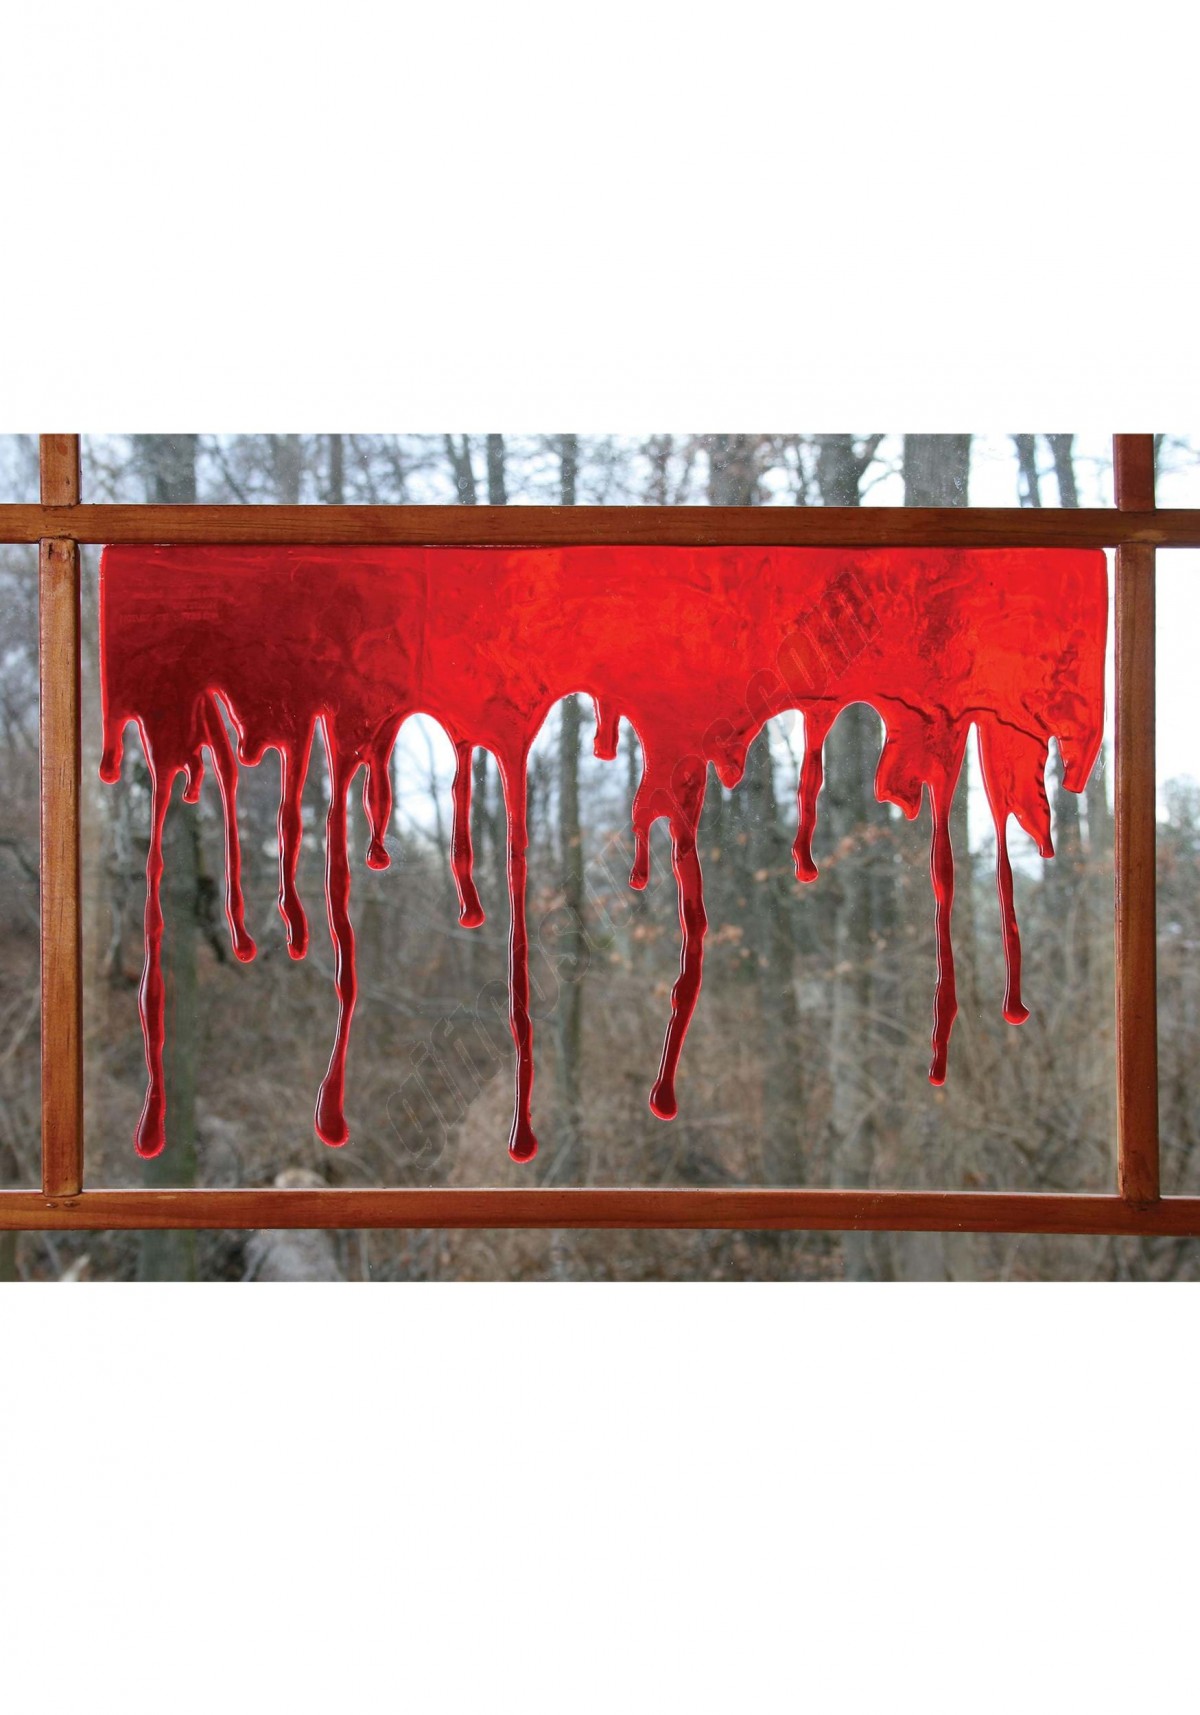 Drips of Blood Window Cling Decoration Promotions - -1